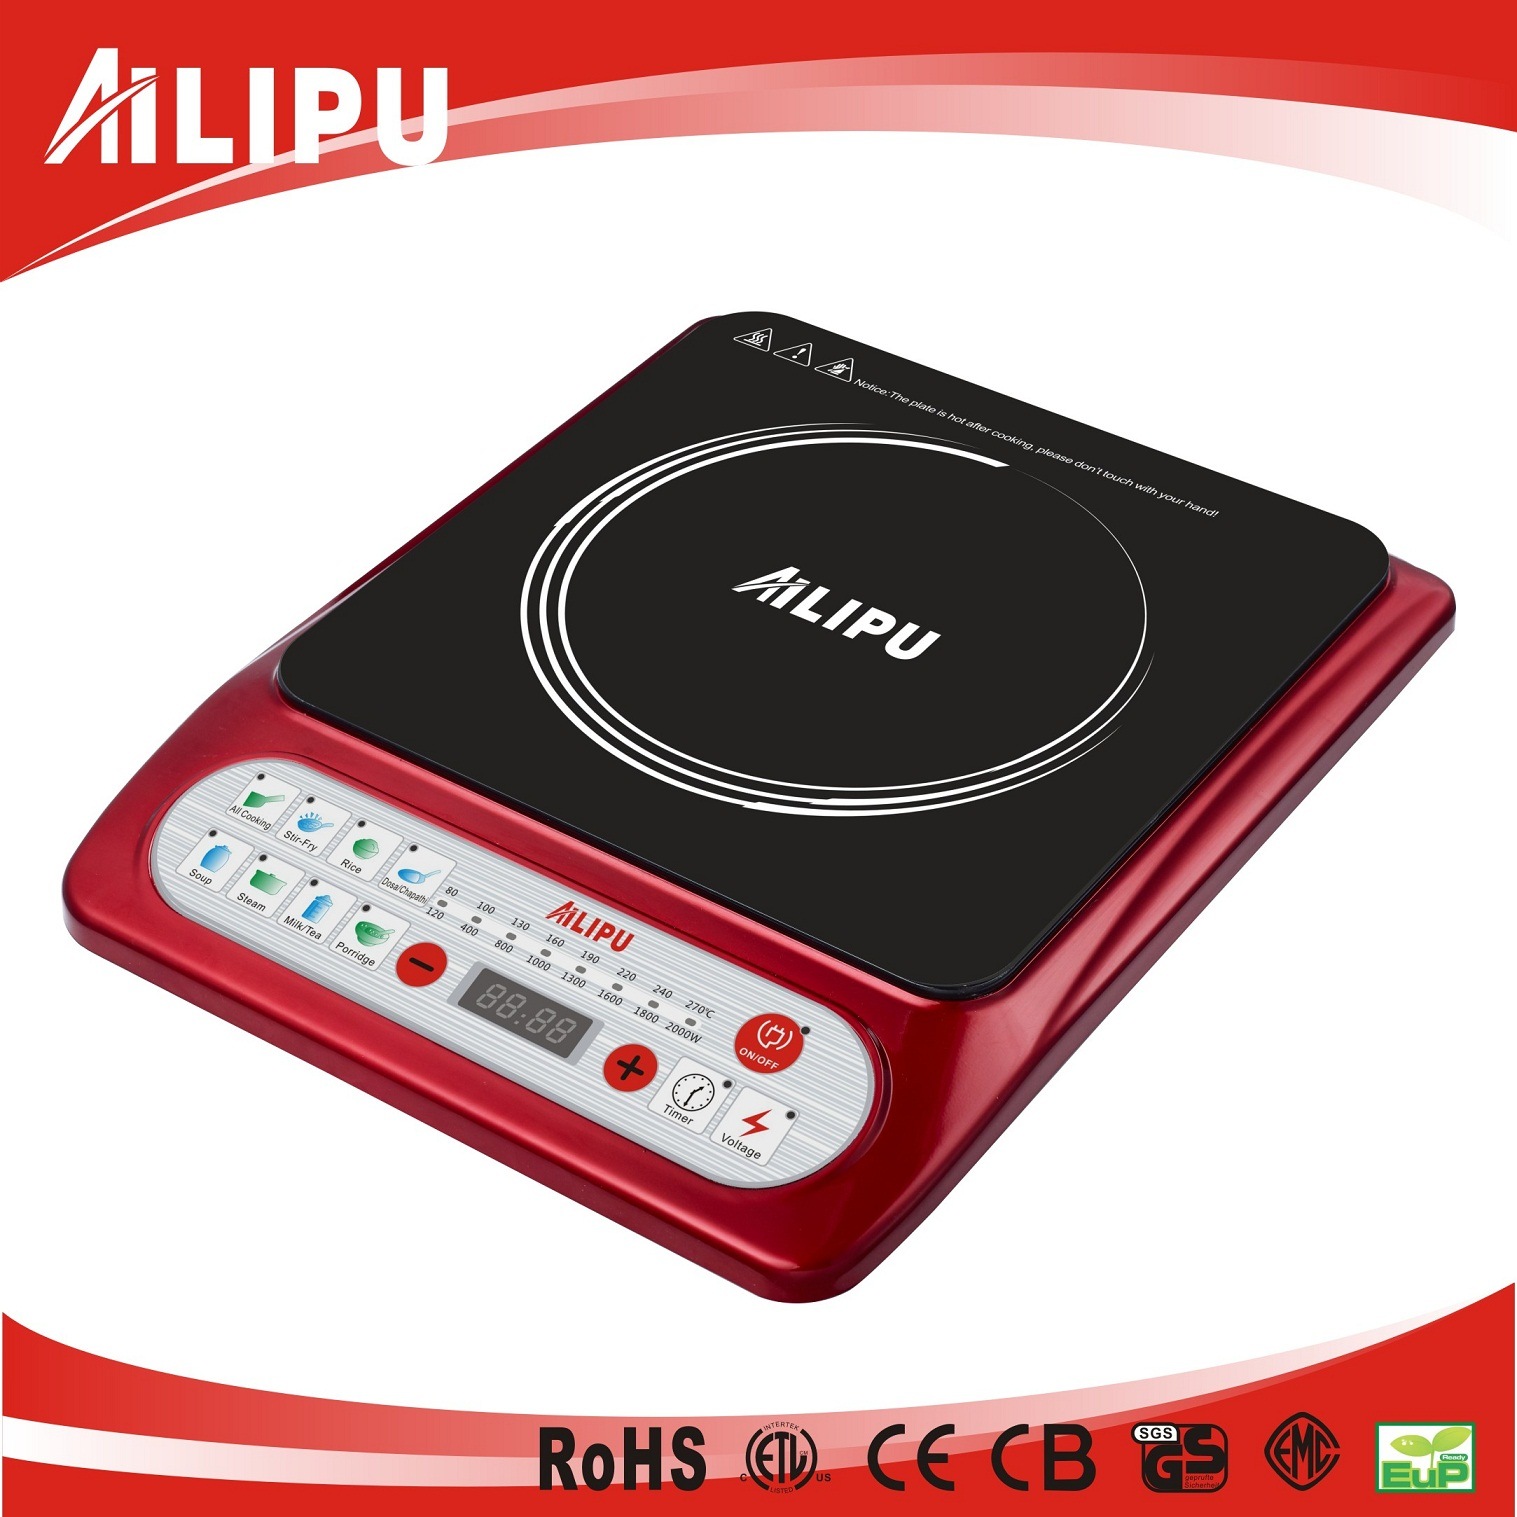 120V 1500W Button Control Induction Cooktop Hot Sale in Us